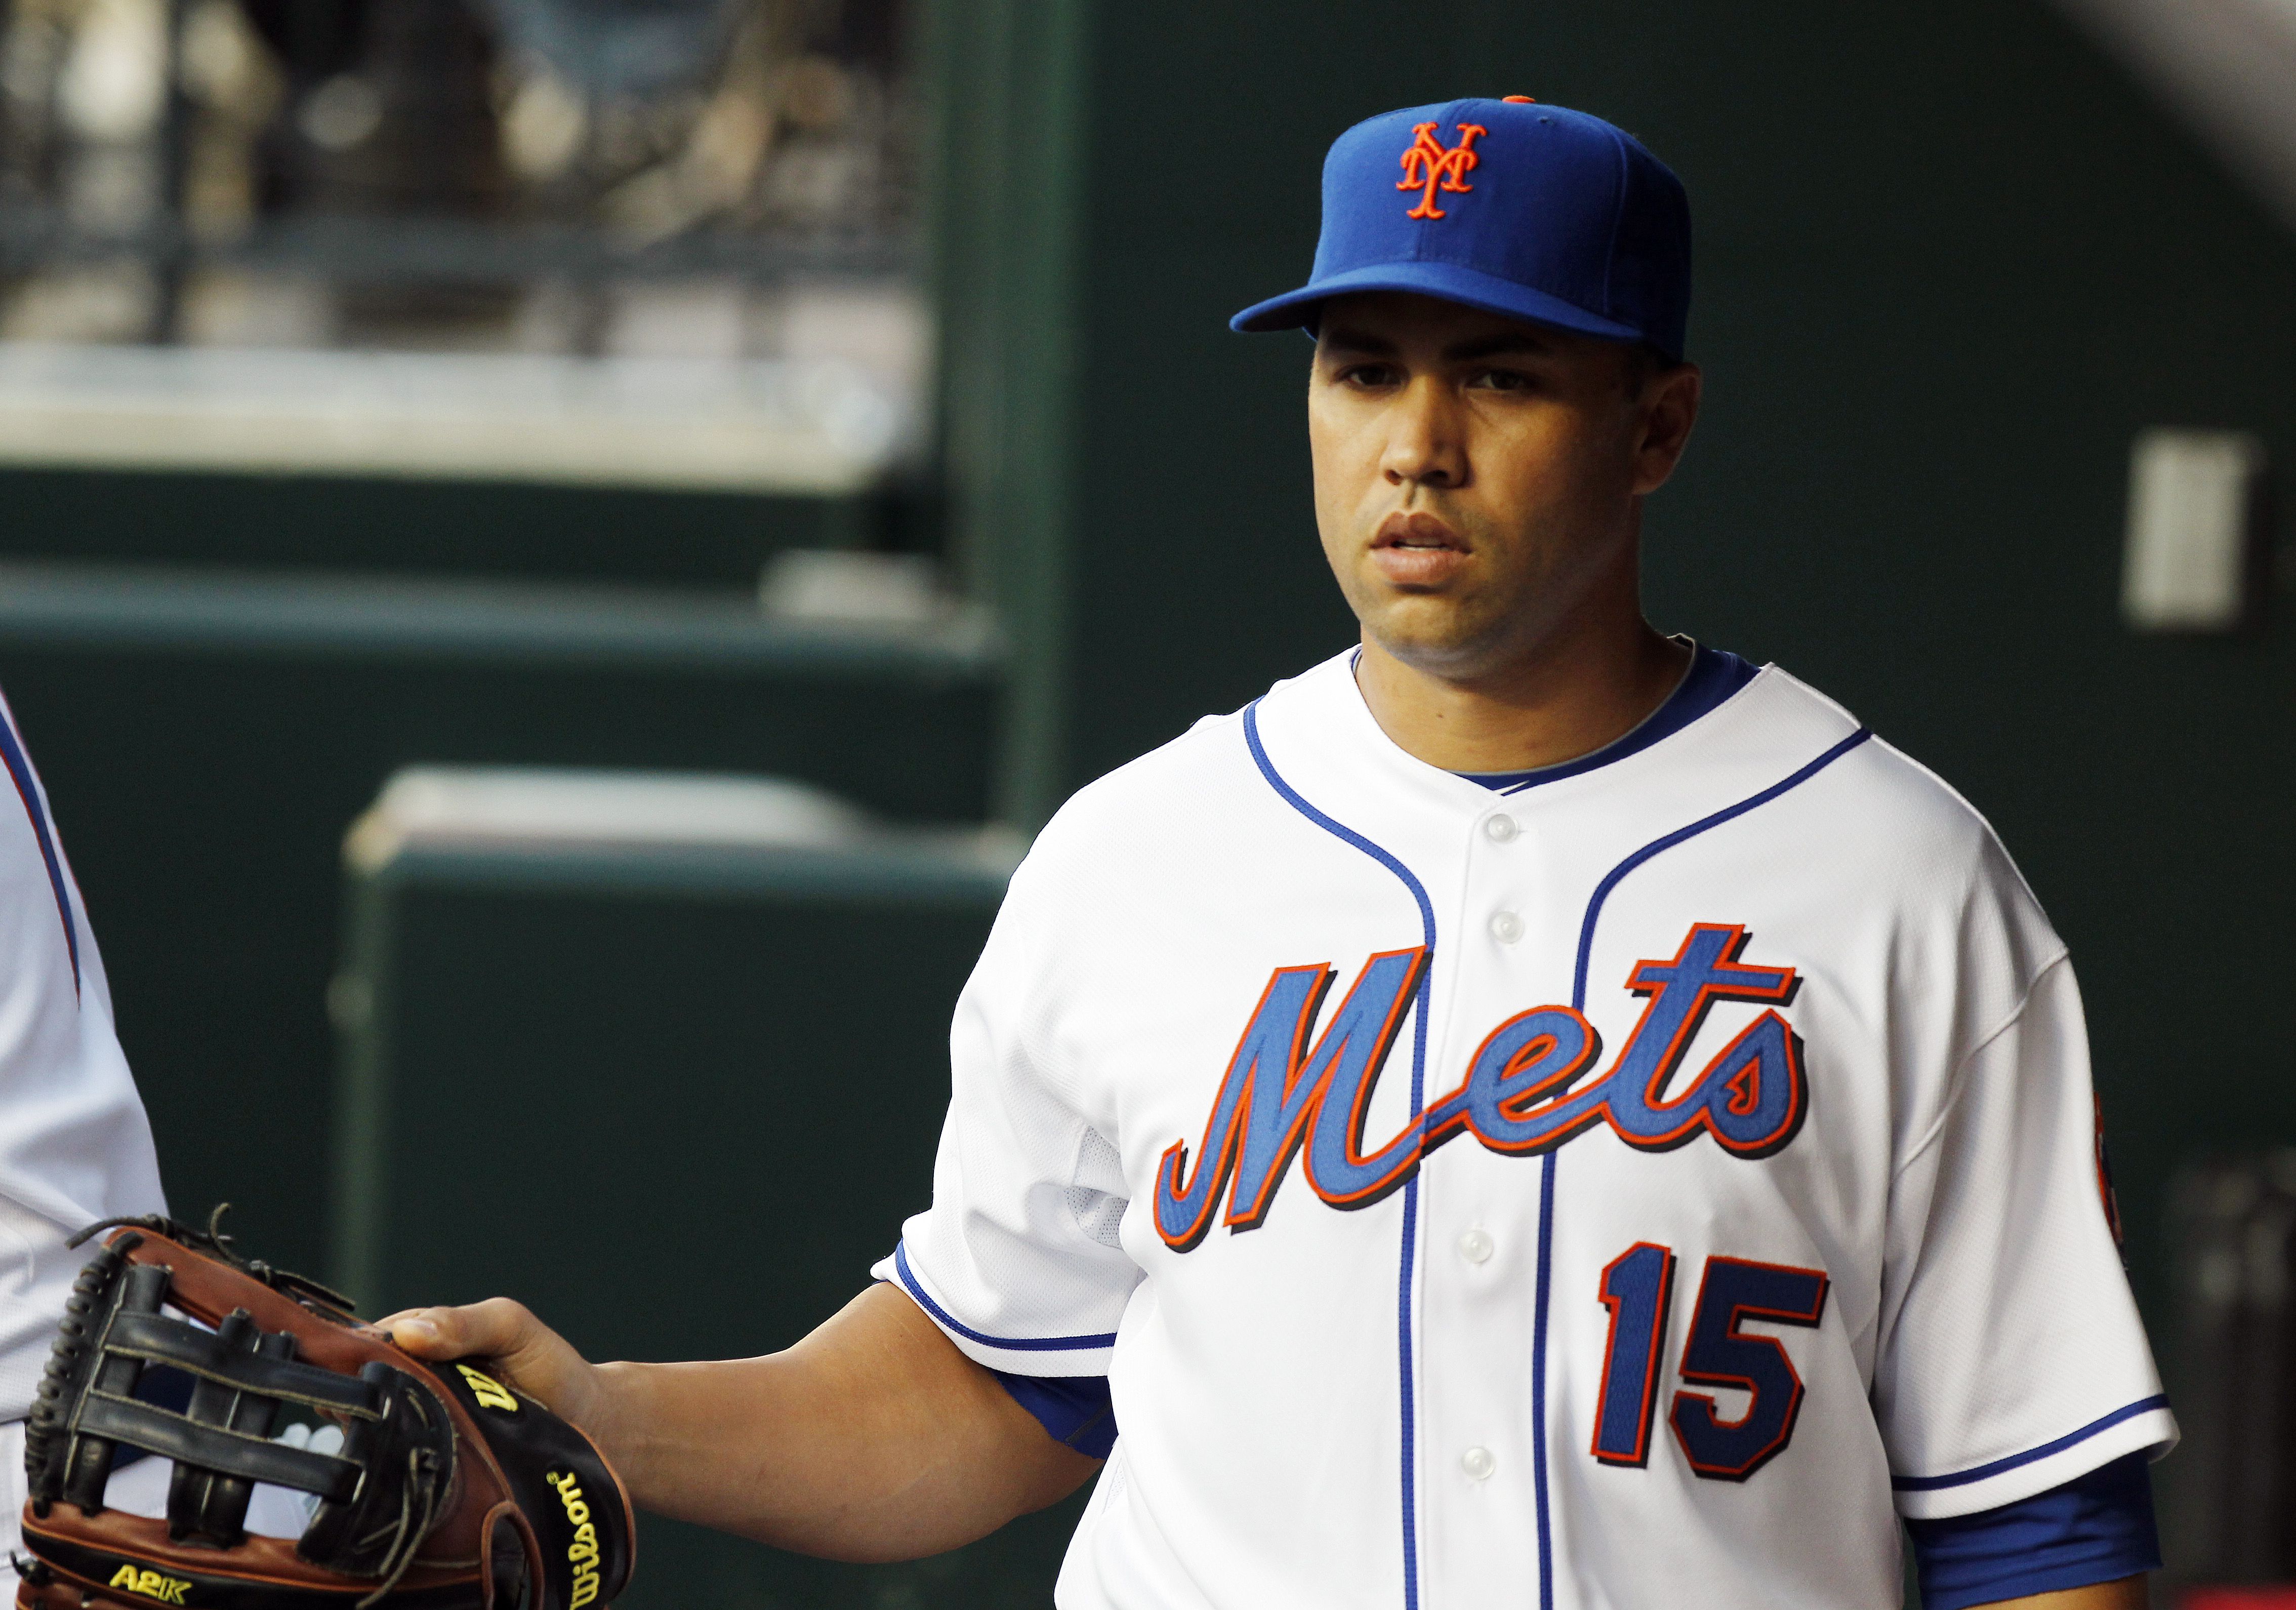 Mets fans cautiously optimistic about Carlos Beltran as manager